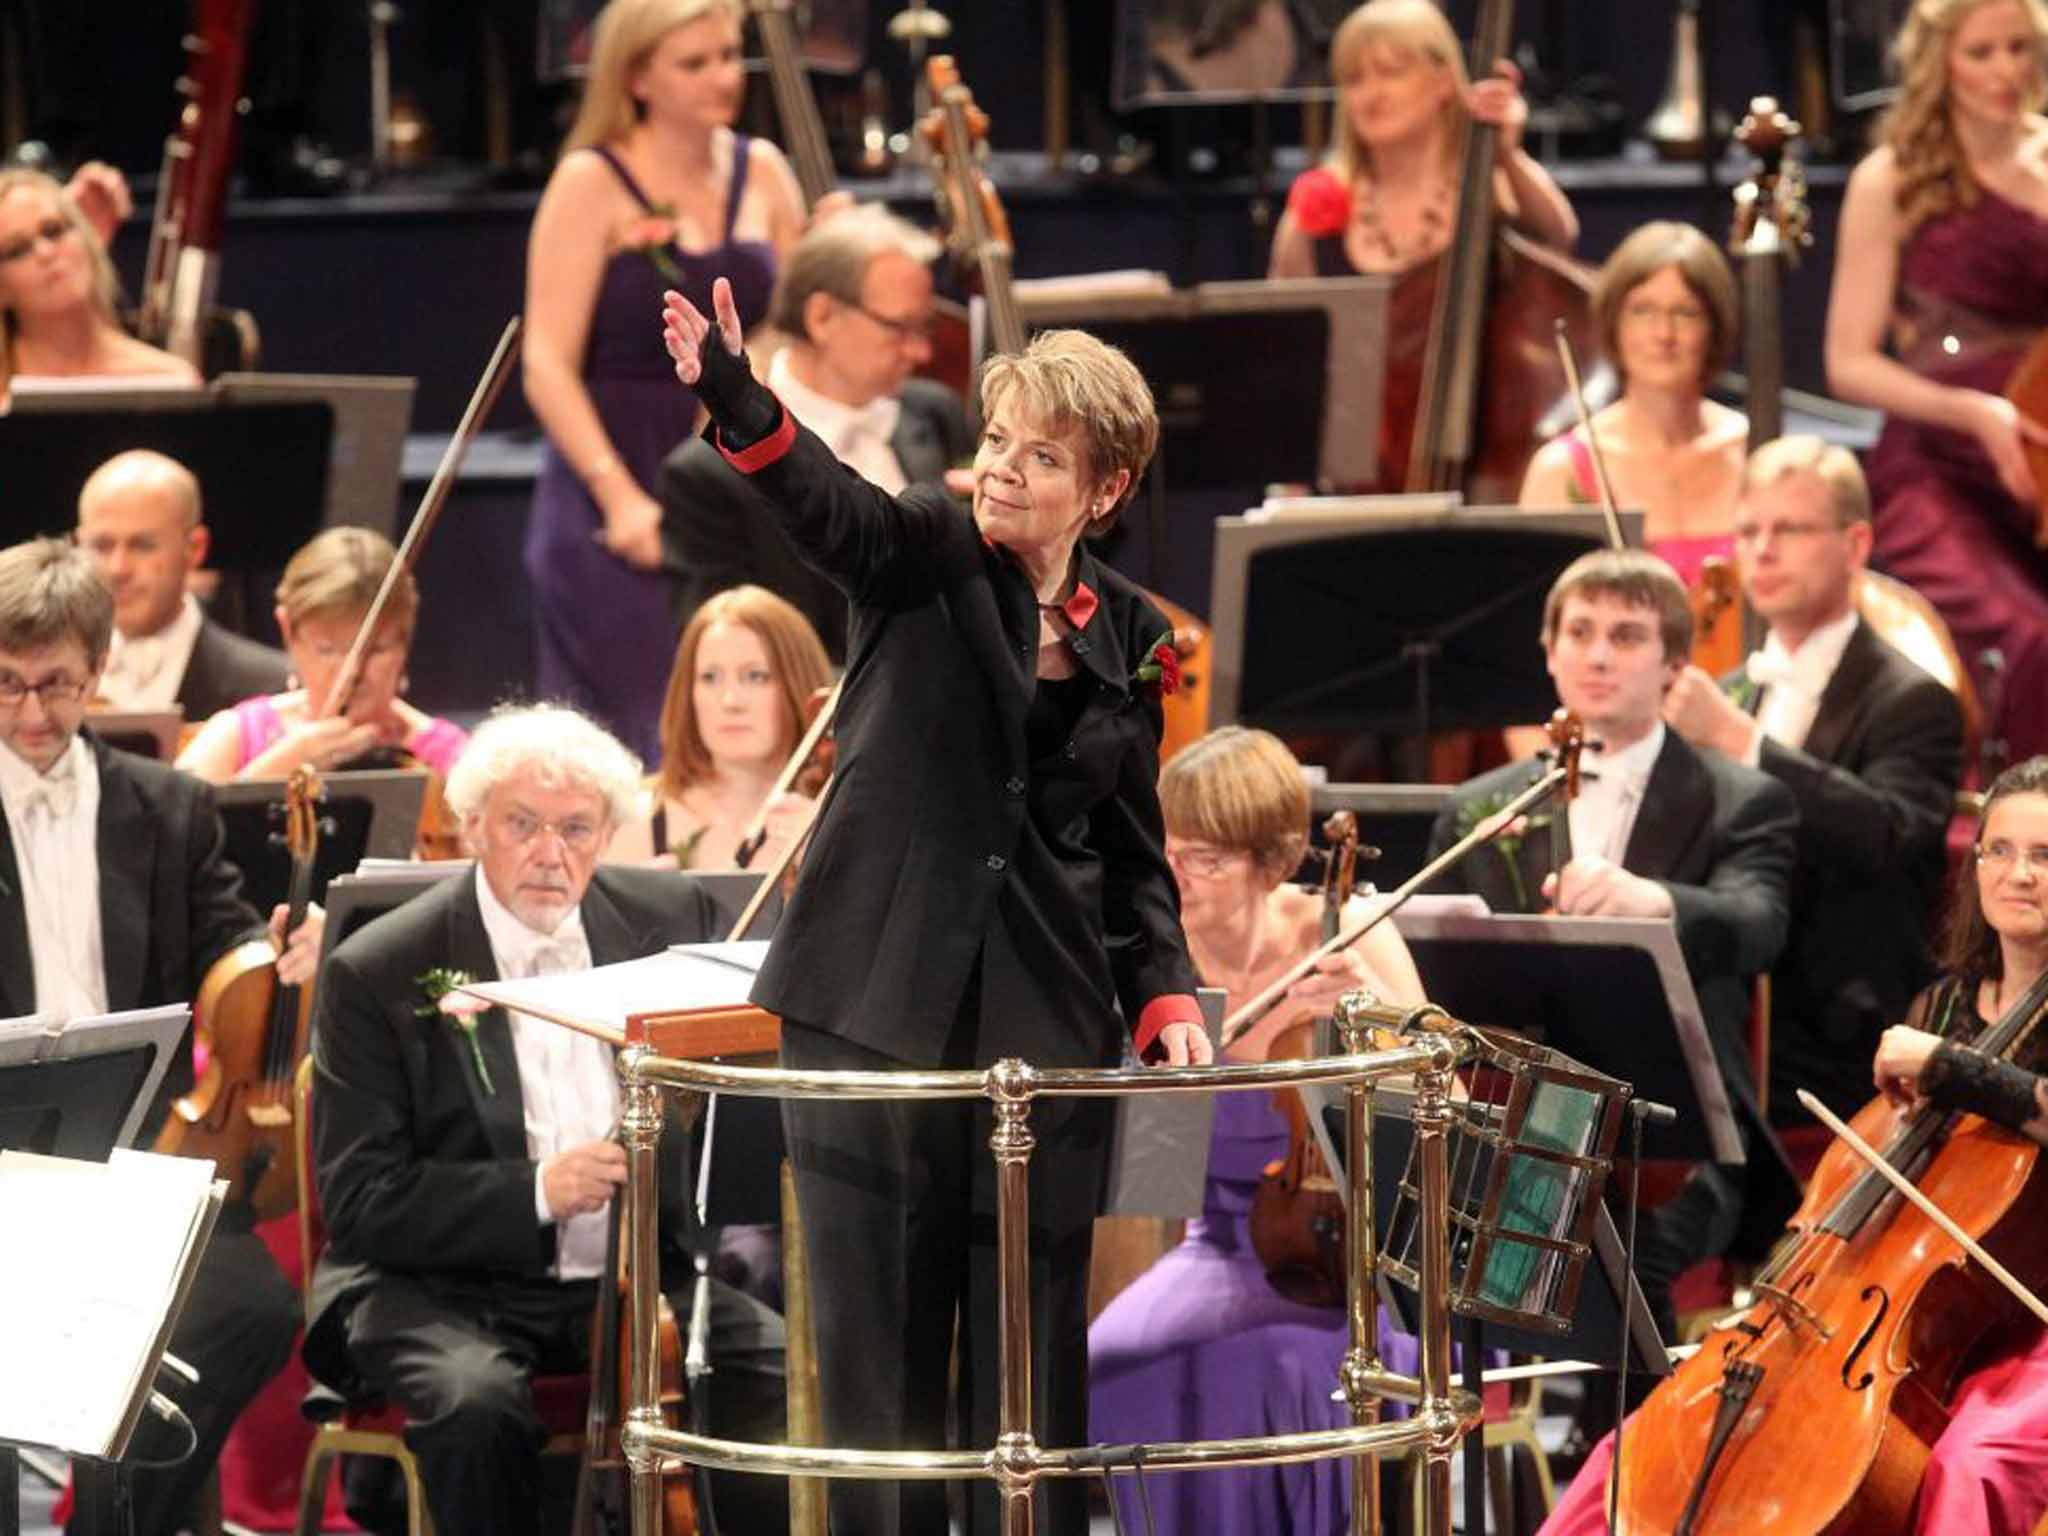 The first woman to conduct the Last Night of the Proms